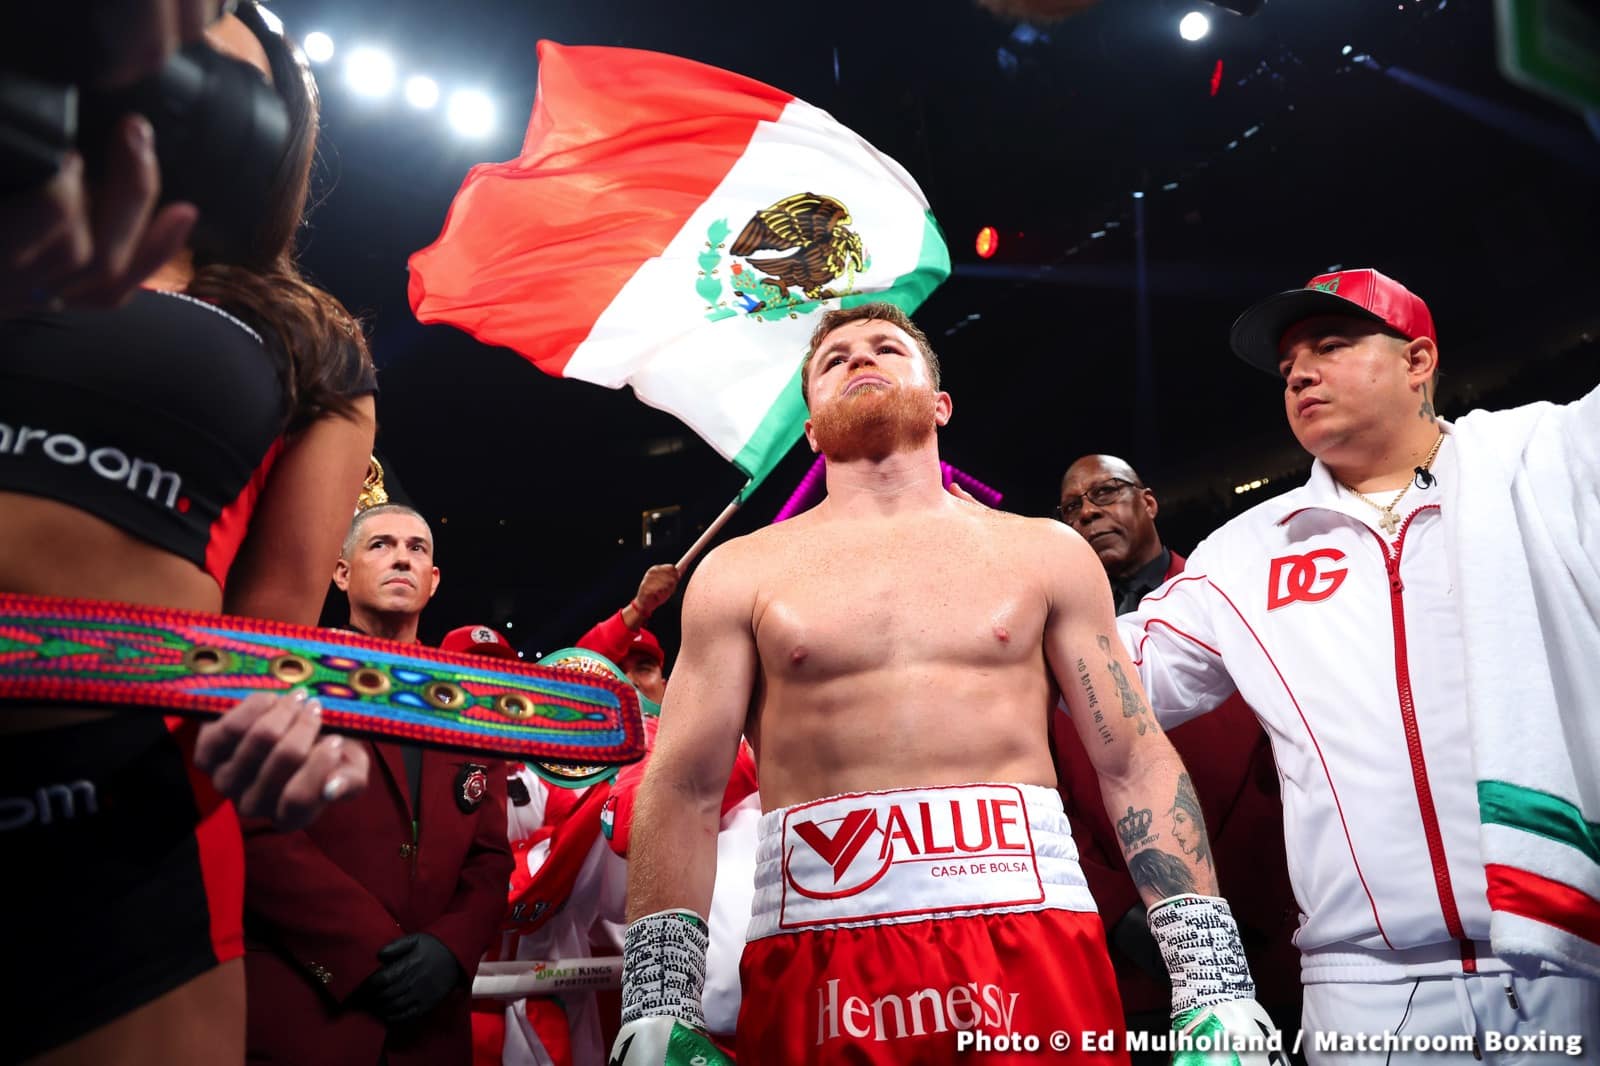 Canelo defeats Golovkin by 12 round decision - Boxing Results